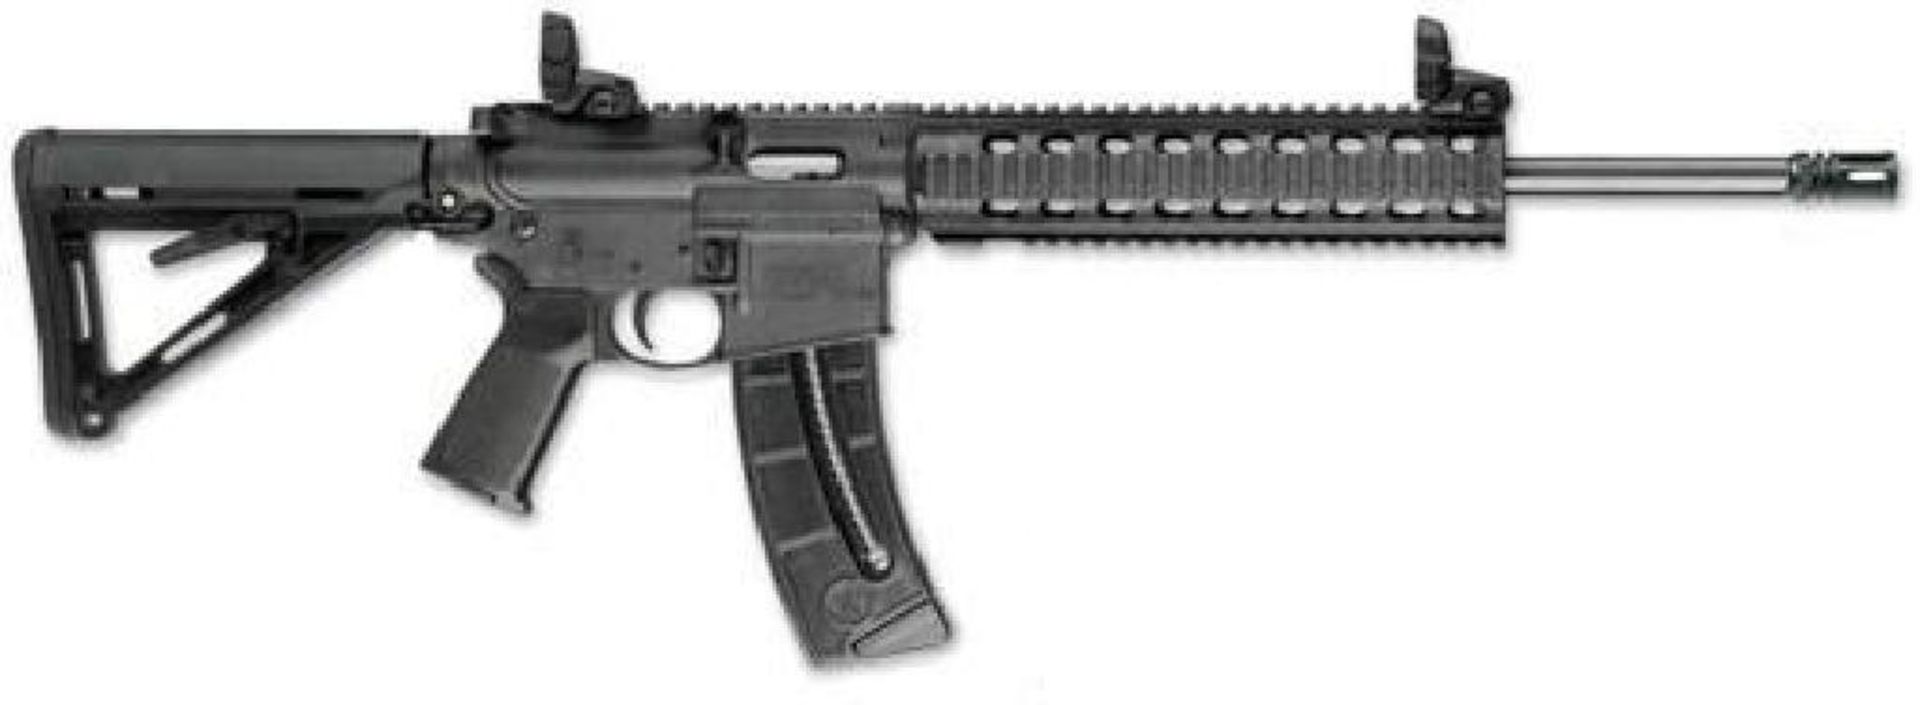 NEW! SMITH AND WESSON M&P15-22 MOE 22 LR 022188142884